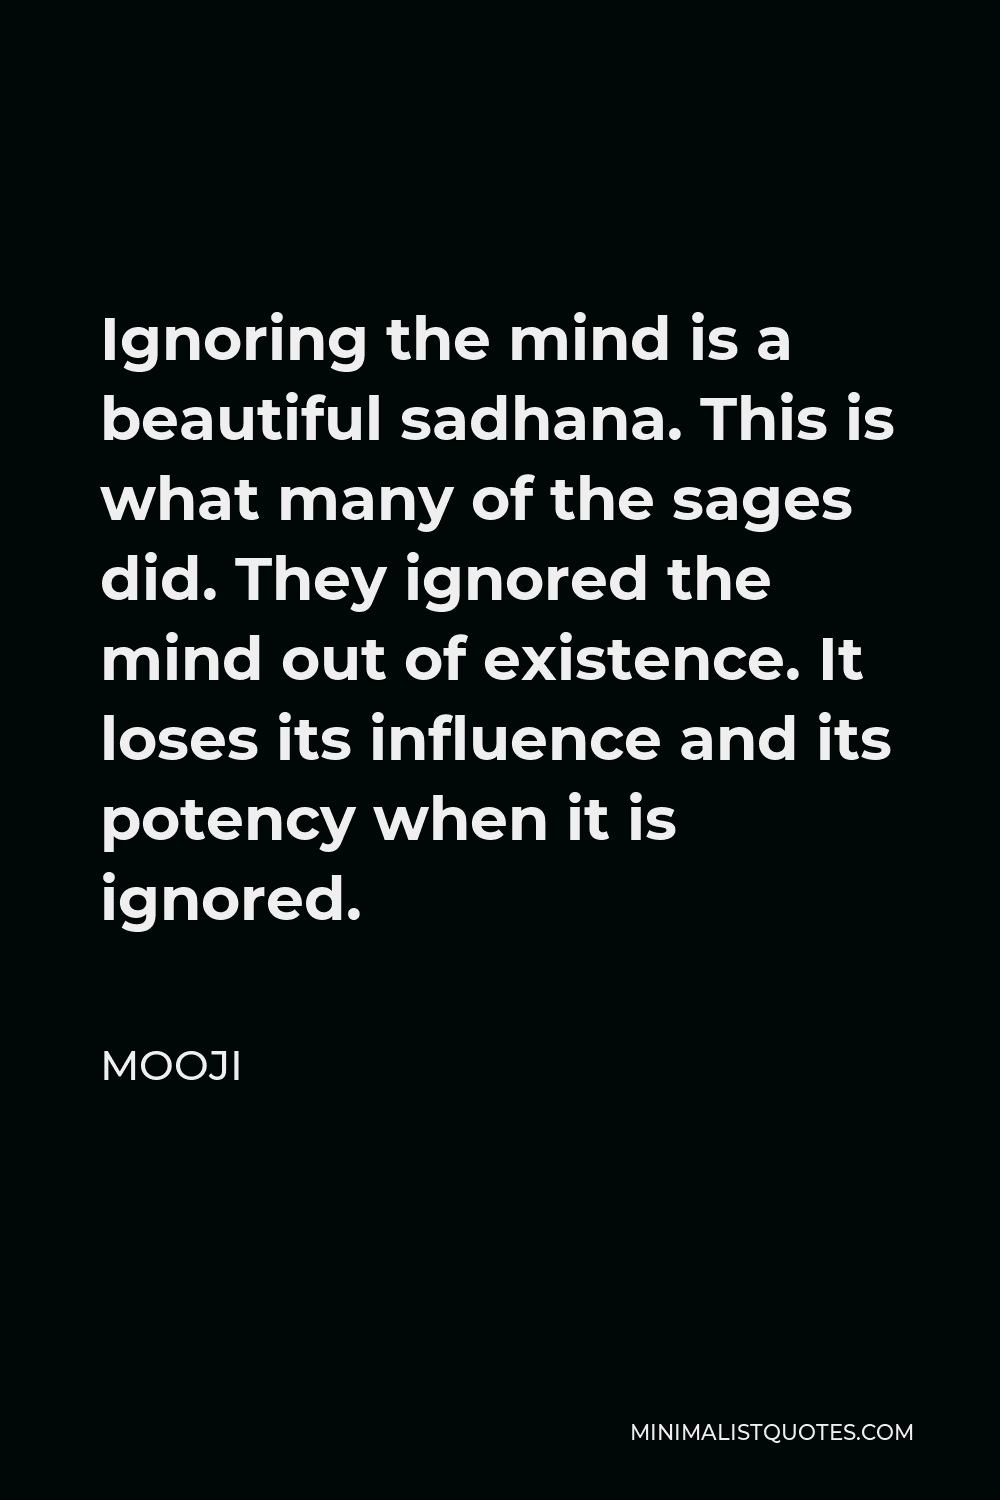 Mooji Quote - Ignoring the mind is a beautiful sadhana. This is what many of the sages did. They ignored the mind out of existence. It loses its influence and its potency when it is ignored.